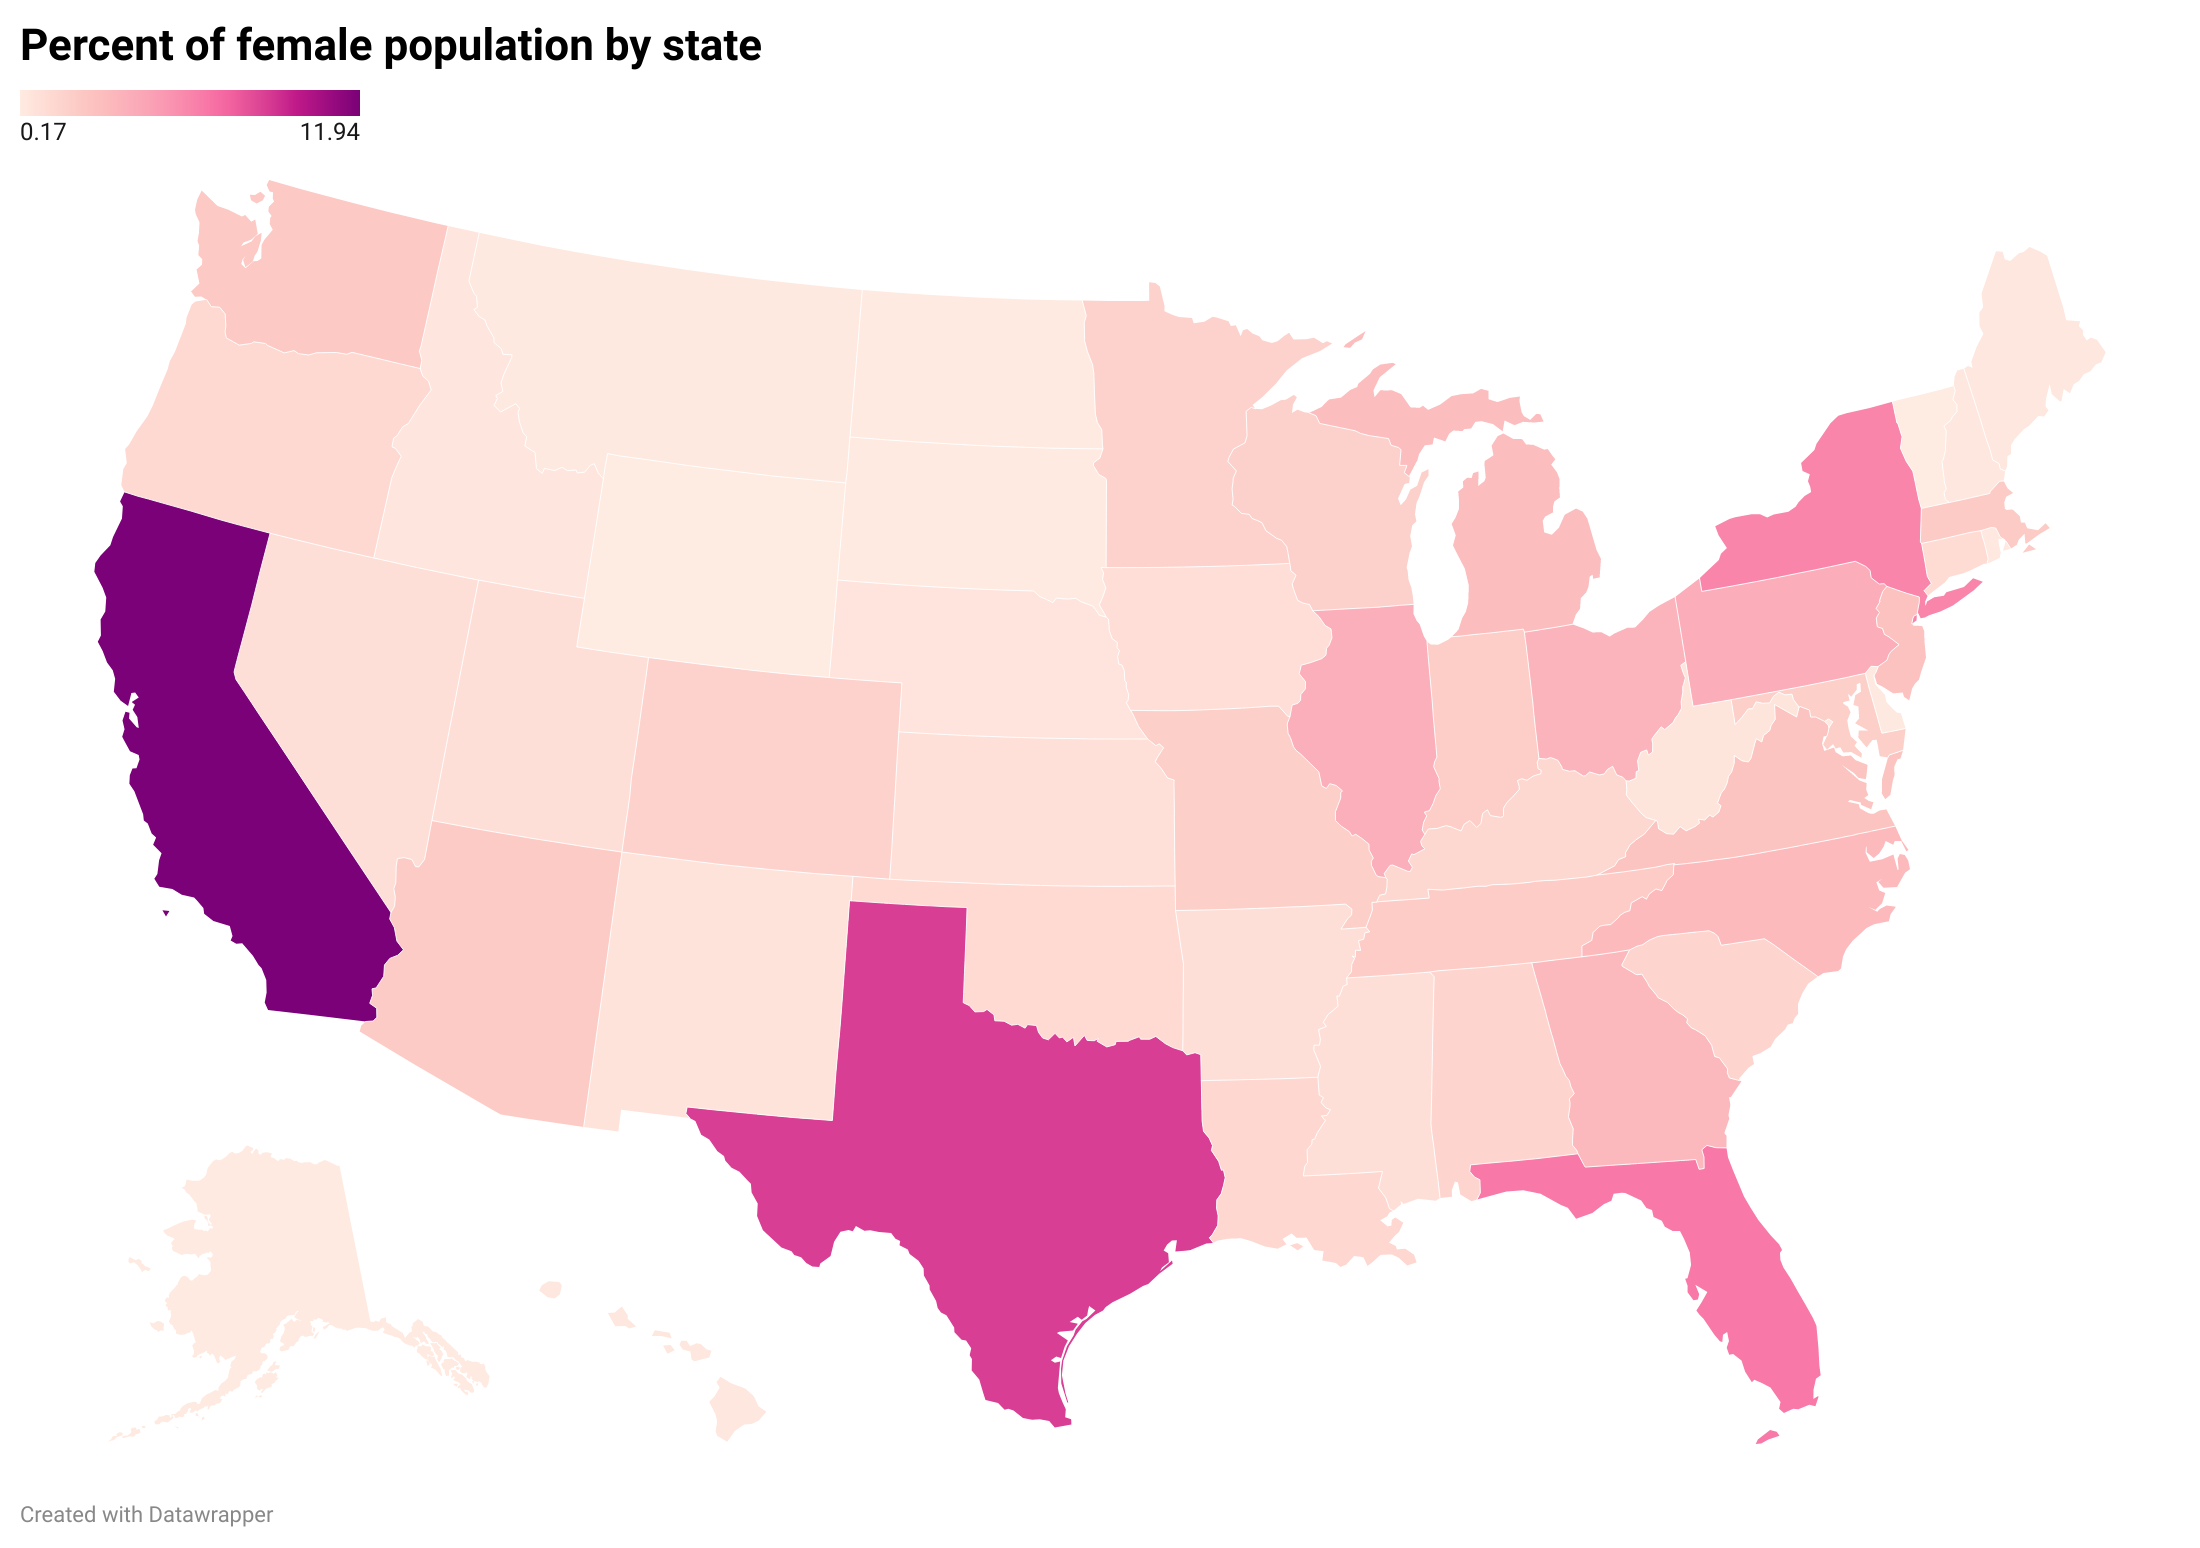 Color-coded map showing percent of female population by state